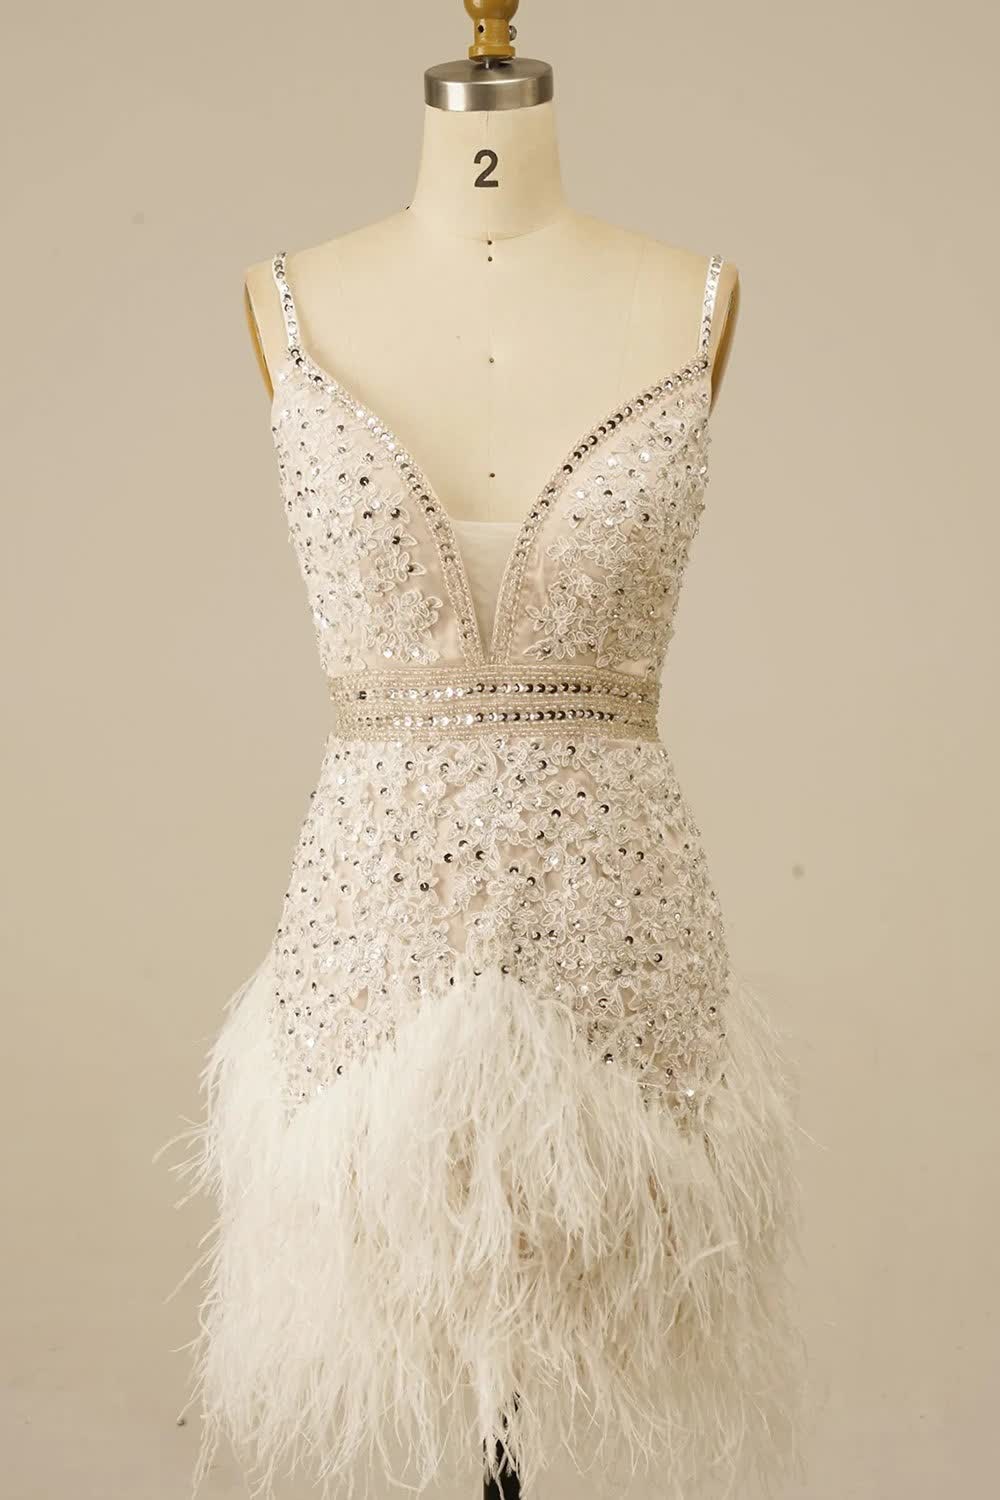 White Sequins Tight Short Corset Homecoming Dress with Feathers outfit, White Sequins Tight Short Homecoming Dress with Feathers